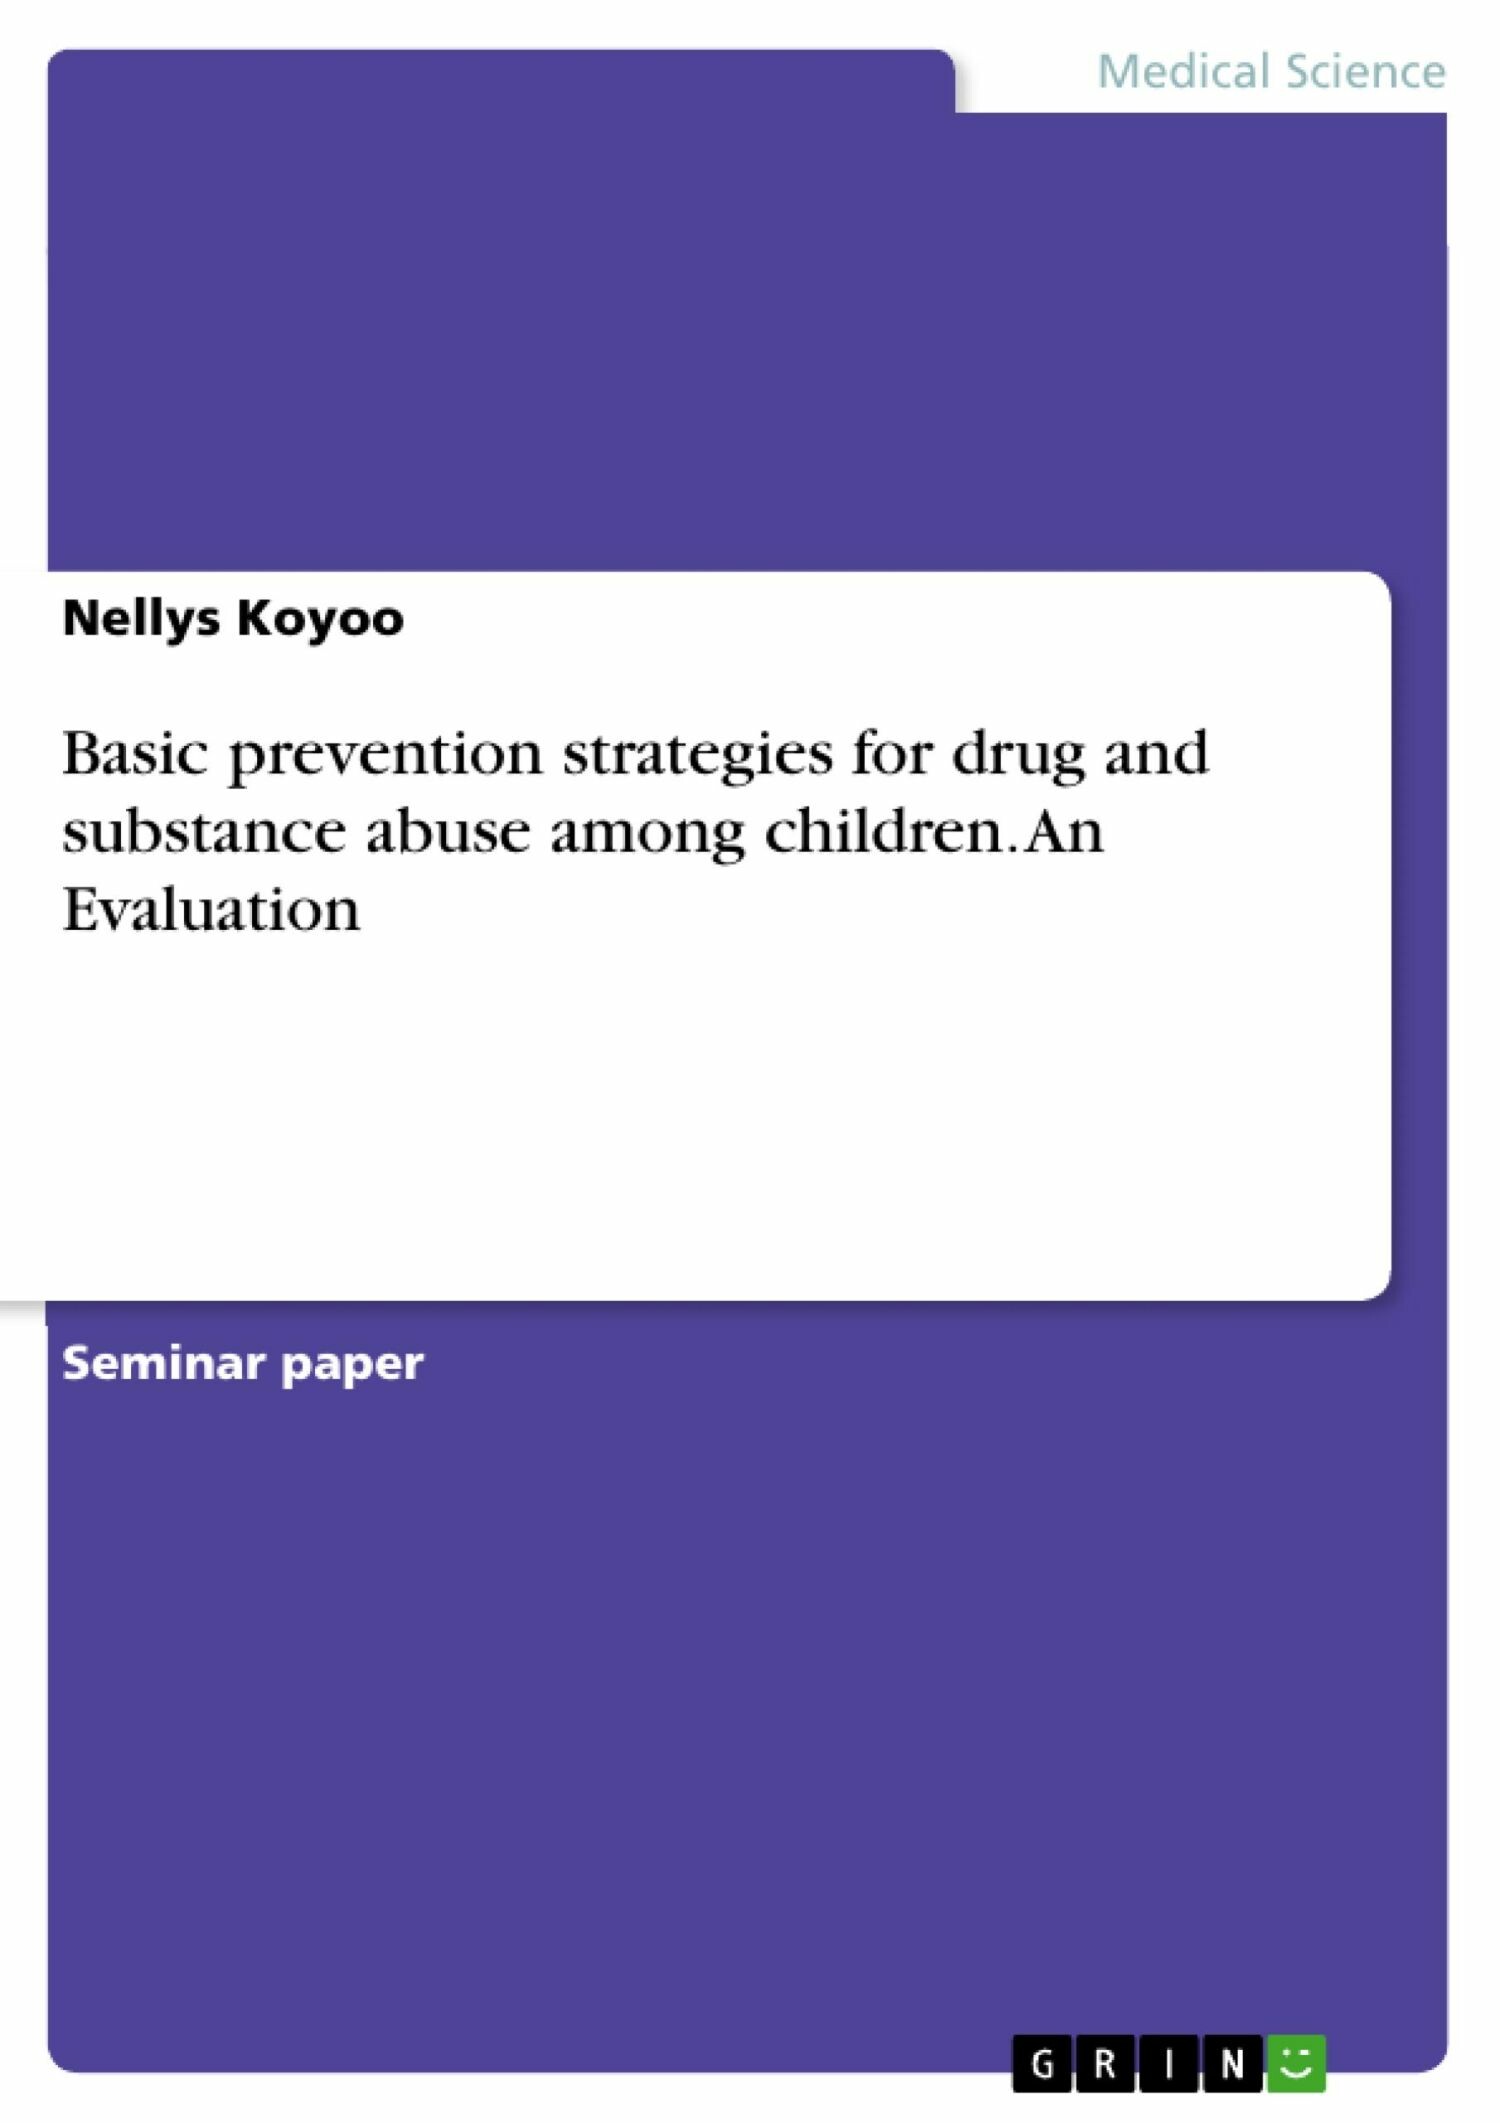 Basic prevention strategies for drug and substance abuse among children. An Evaluation